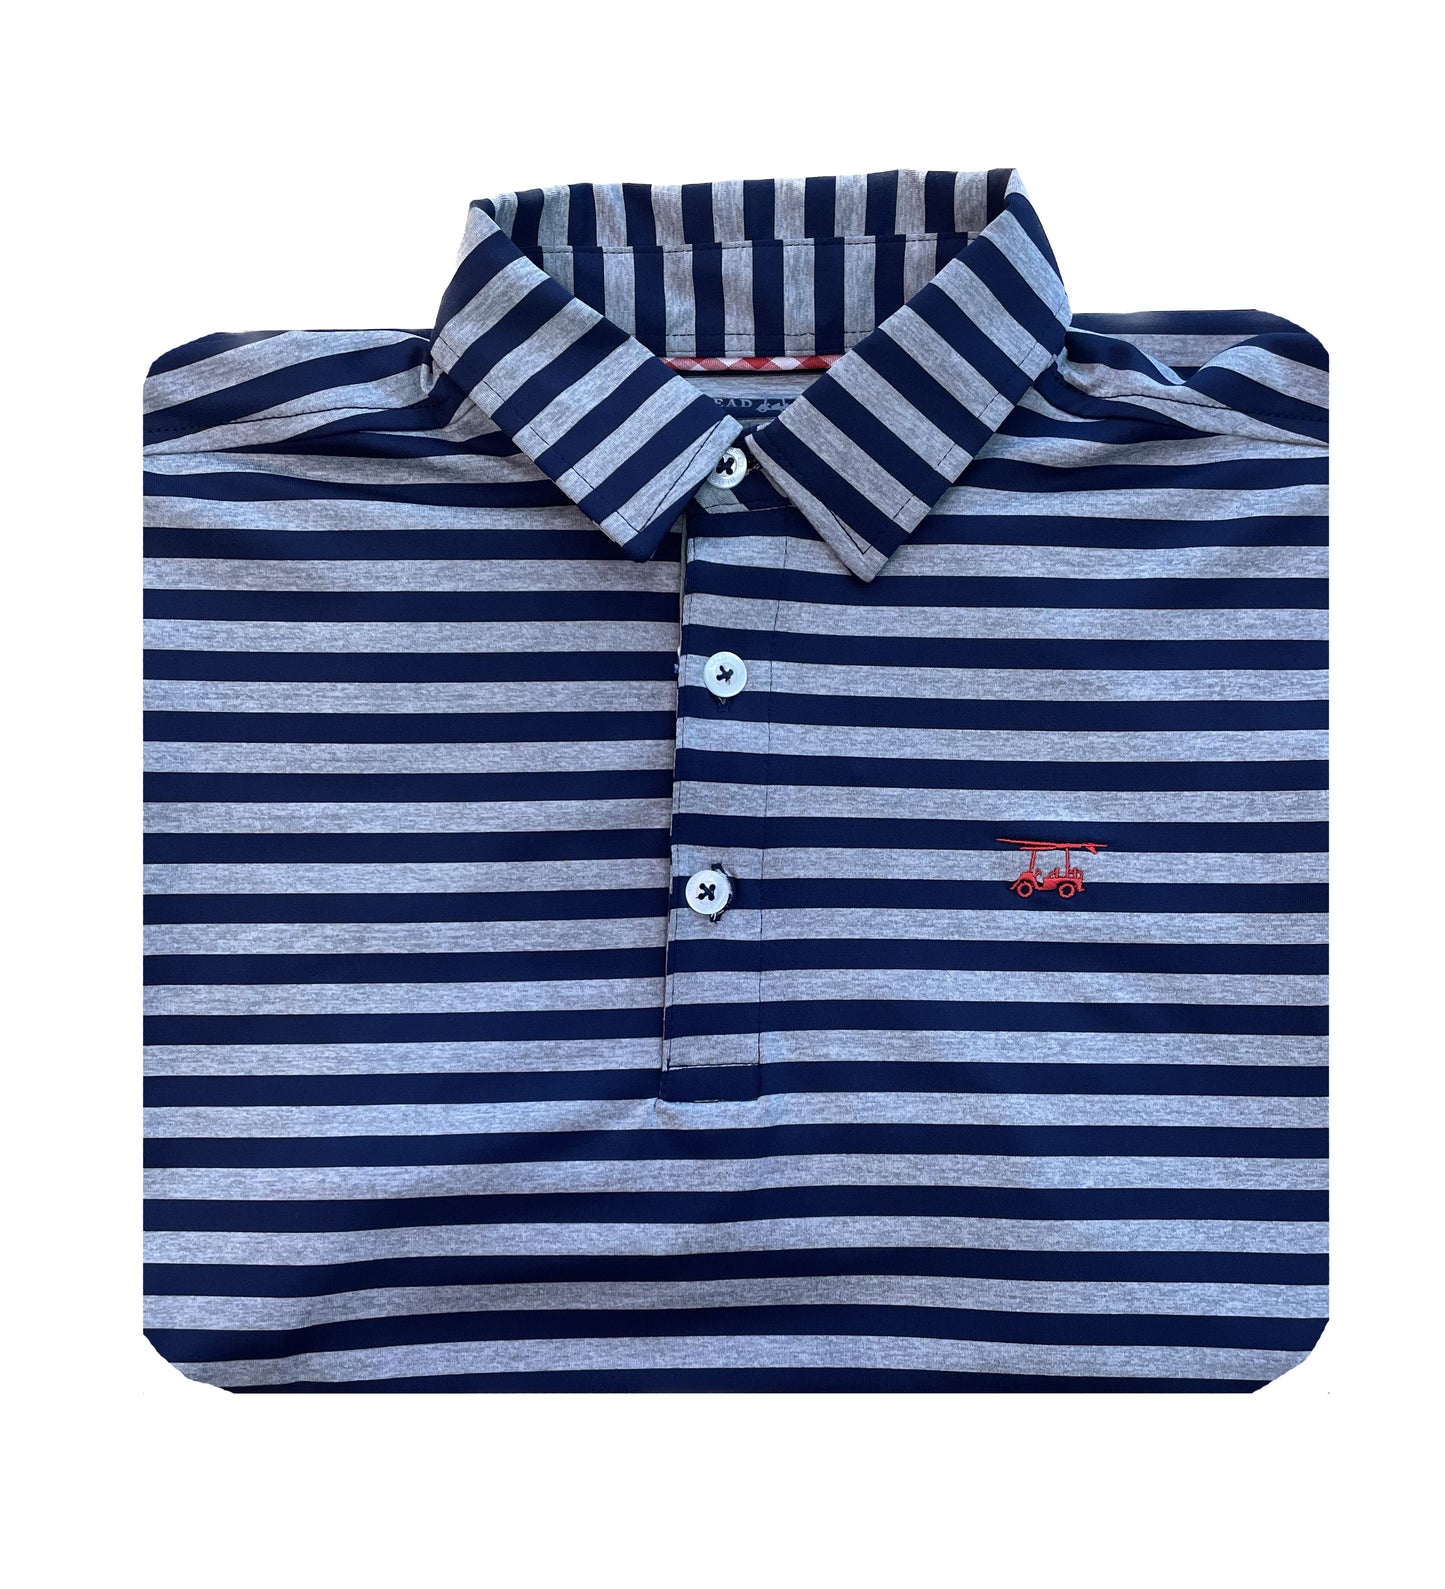 Limited Edition Polo - Heather Grey/Navy Wide Stripe